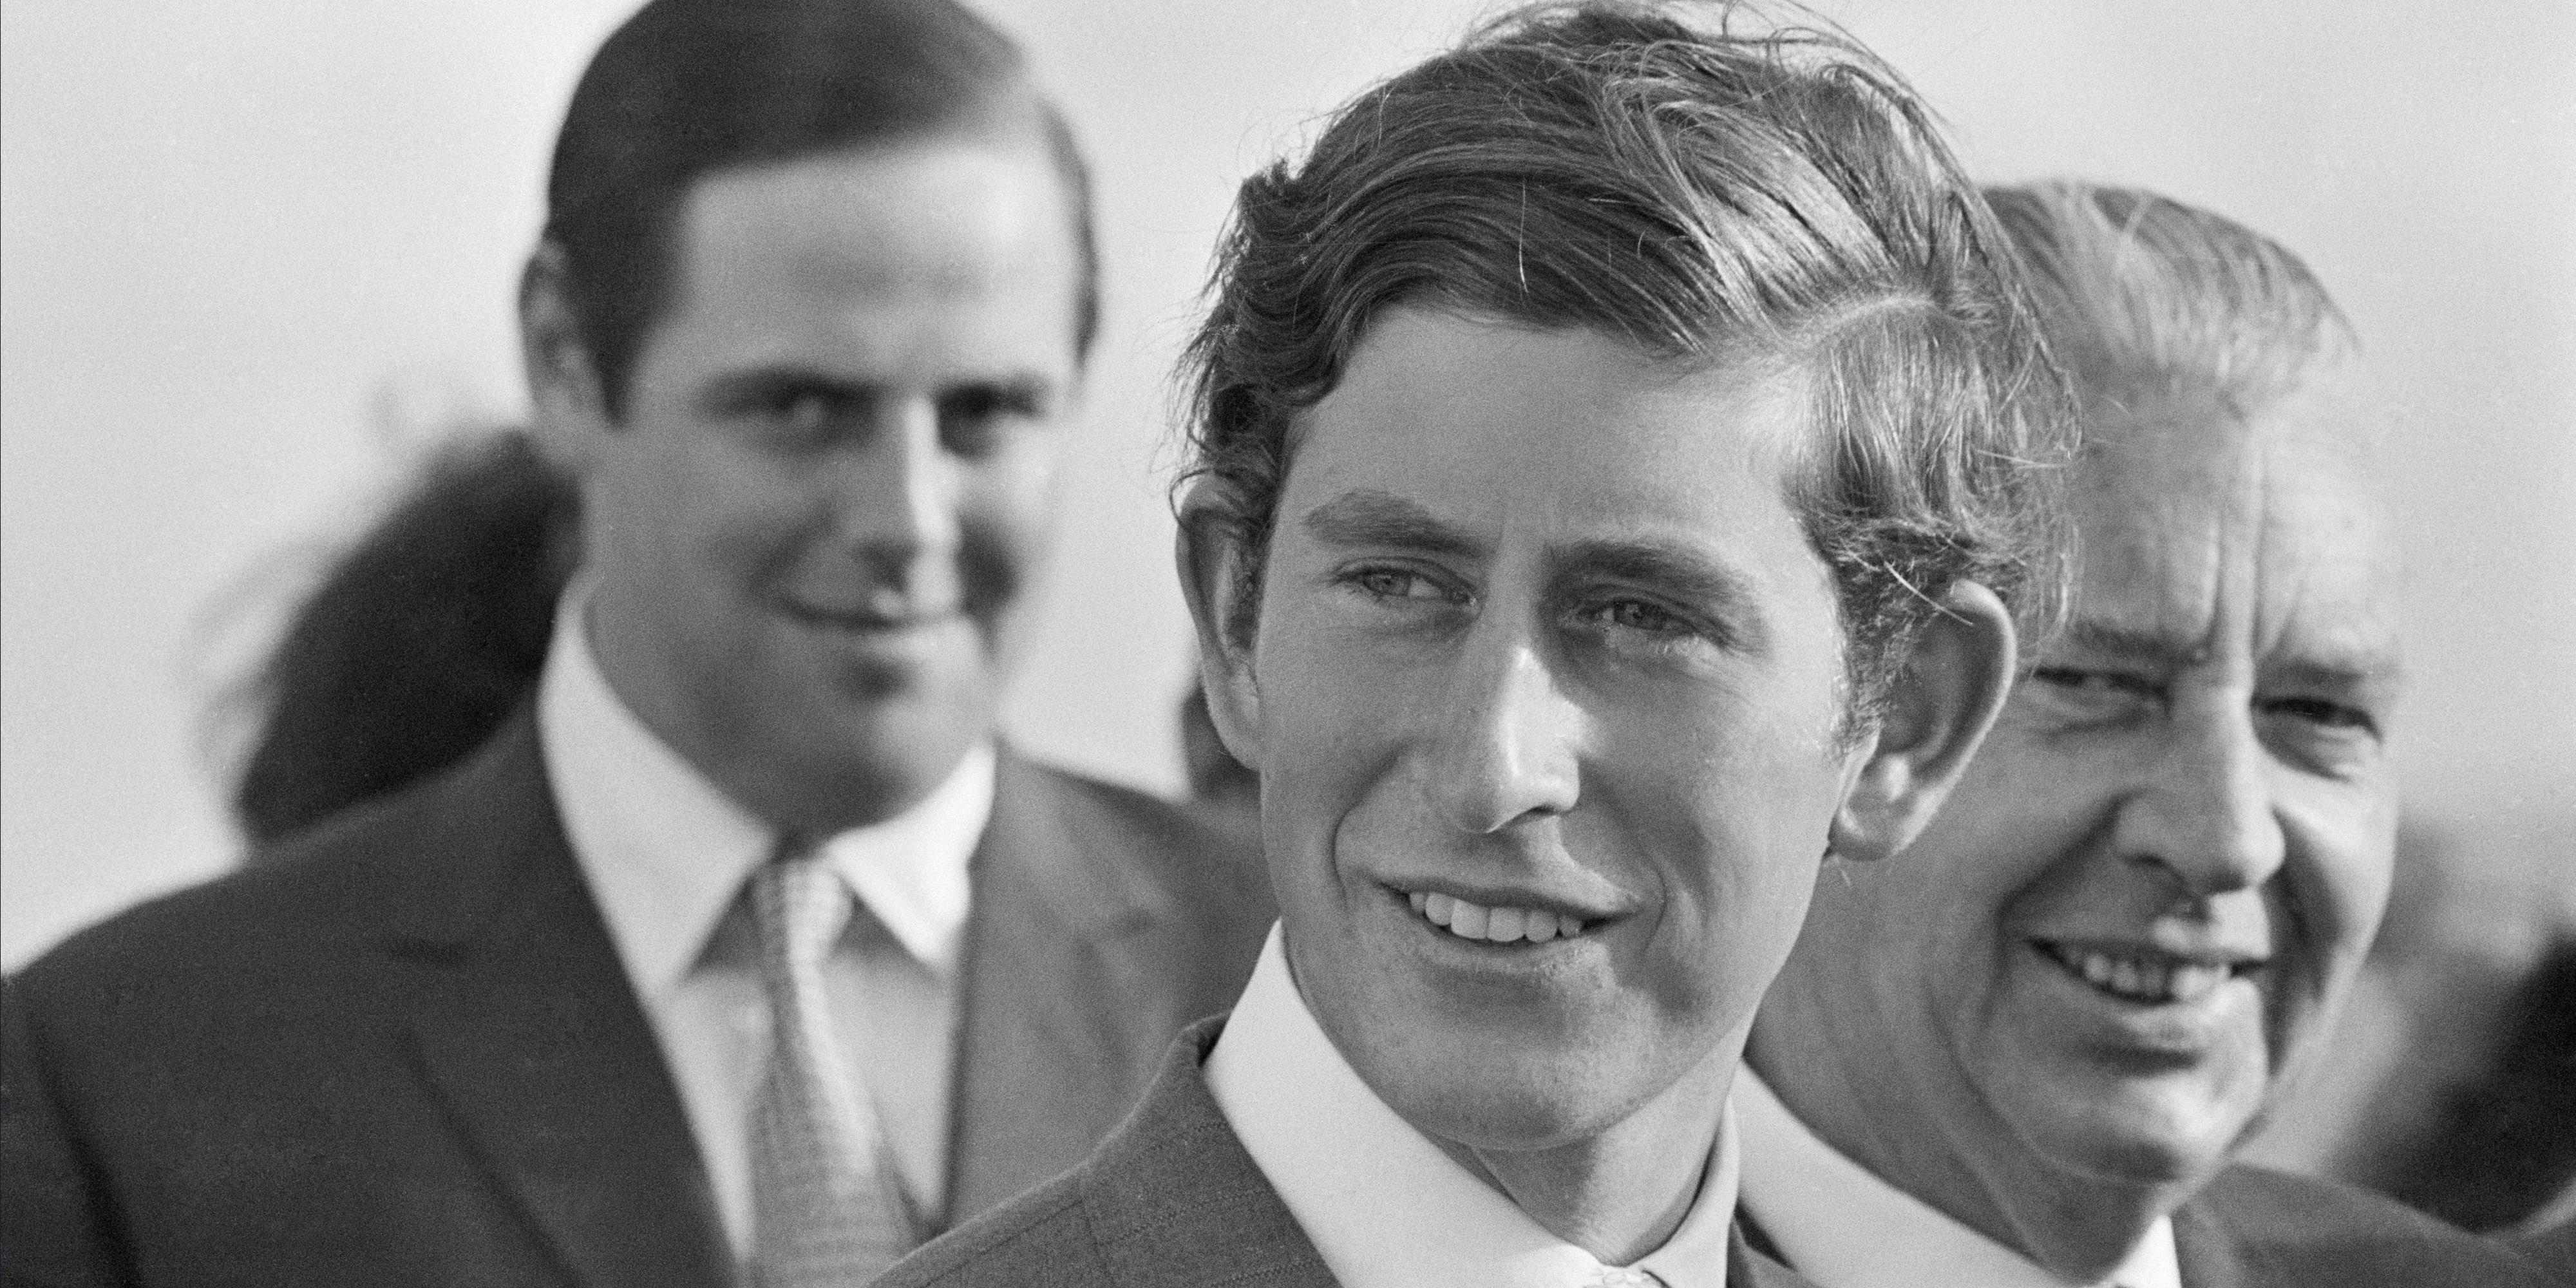 prince charles younger years